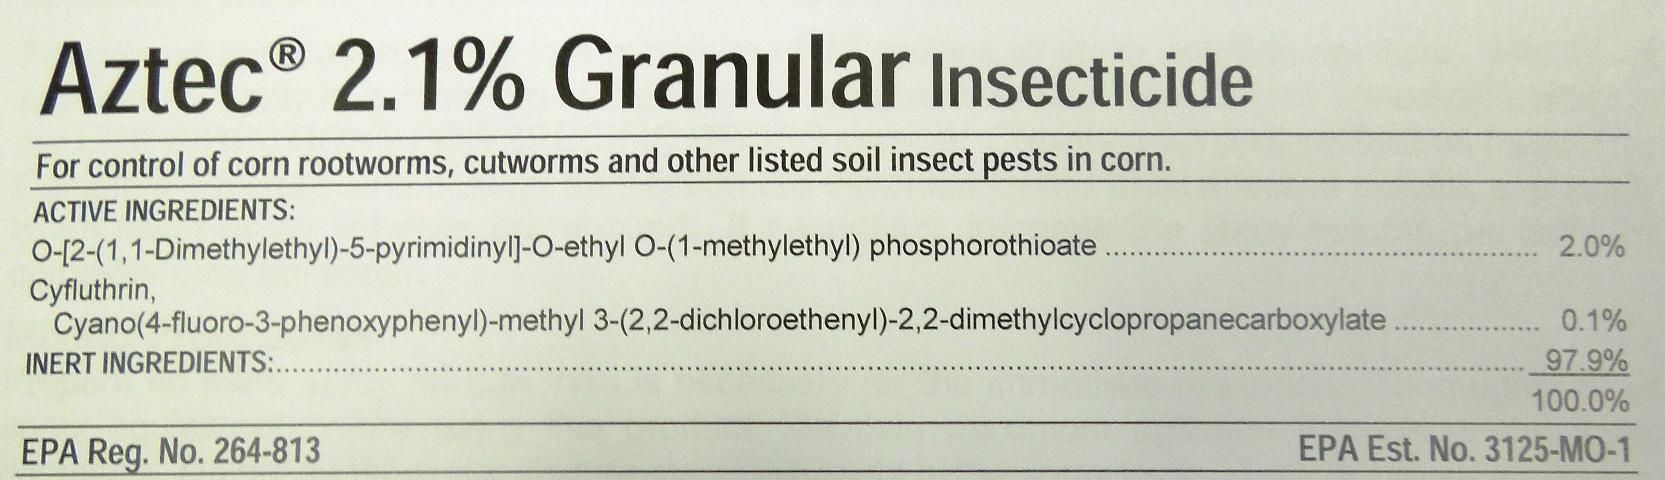 Figure 5. Pests controlled are often listed in a general statement on the front of the label.